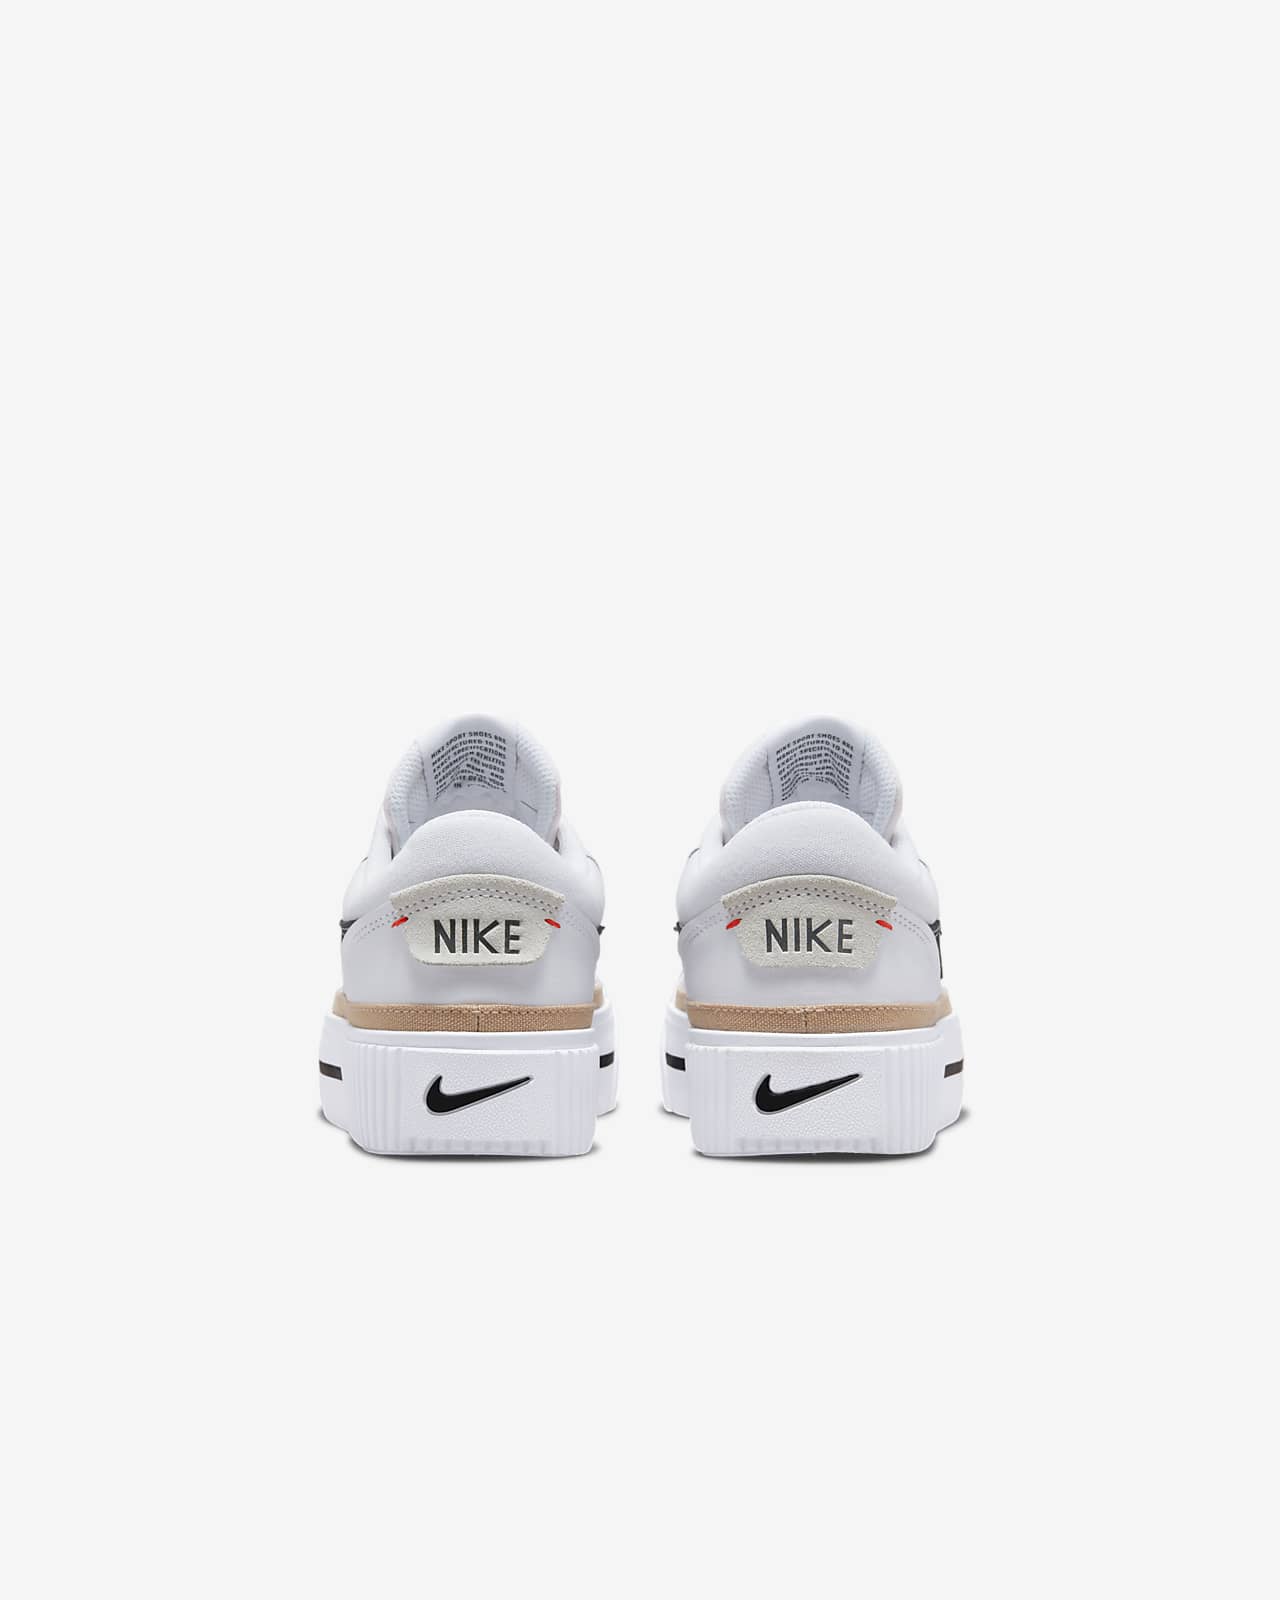 Nike Court Legacy Lift sneakers in white, black, hemp and team